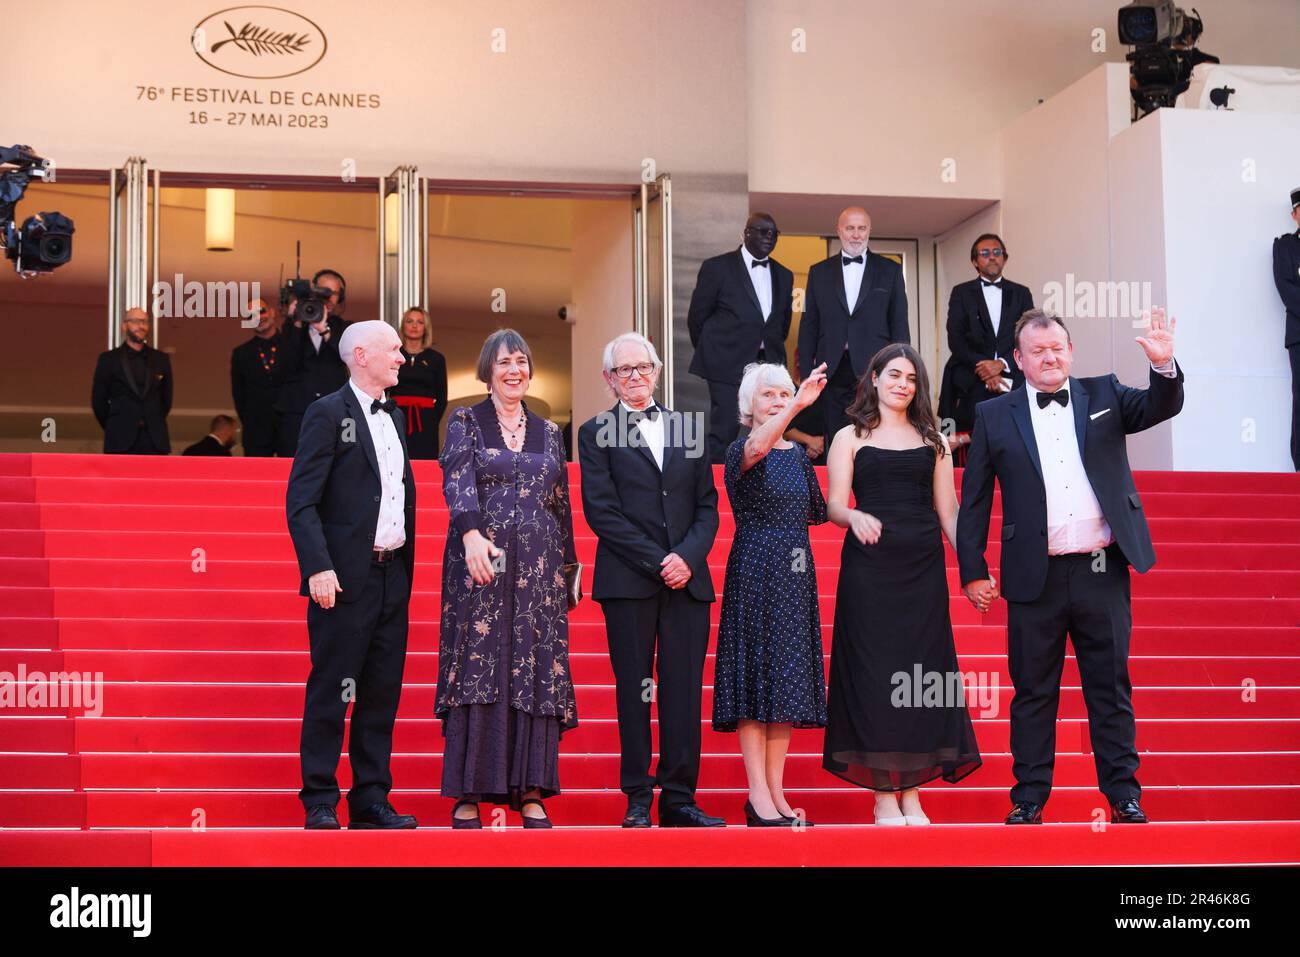 Cannes, France. 26th May, 2023. Paul Laverty, Rebecca O'Brien, Director ...